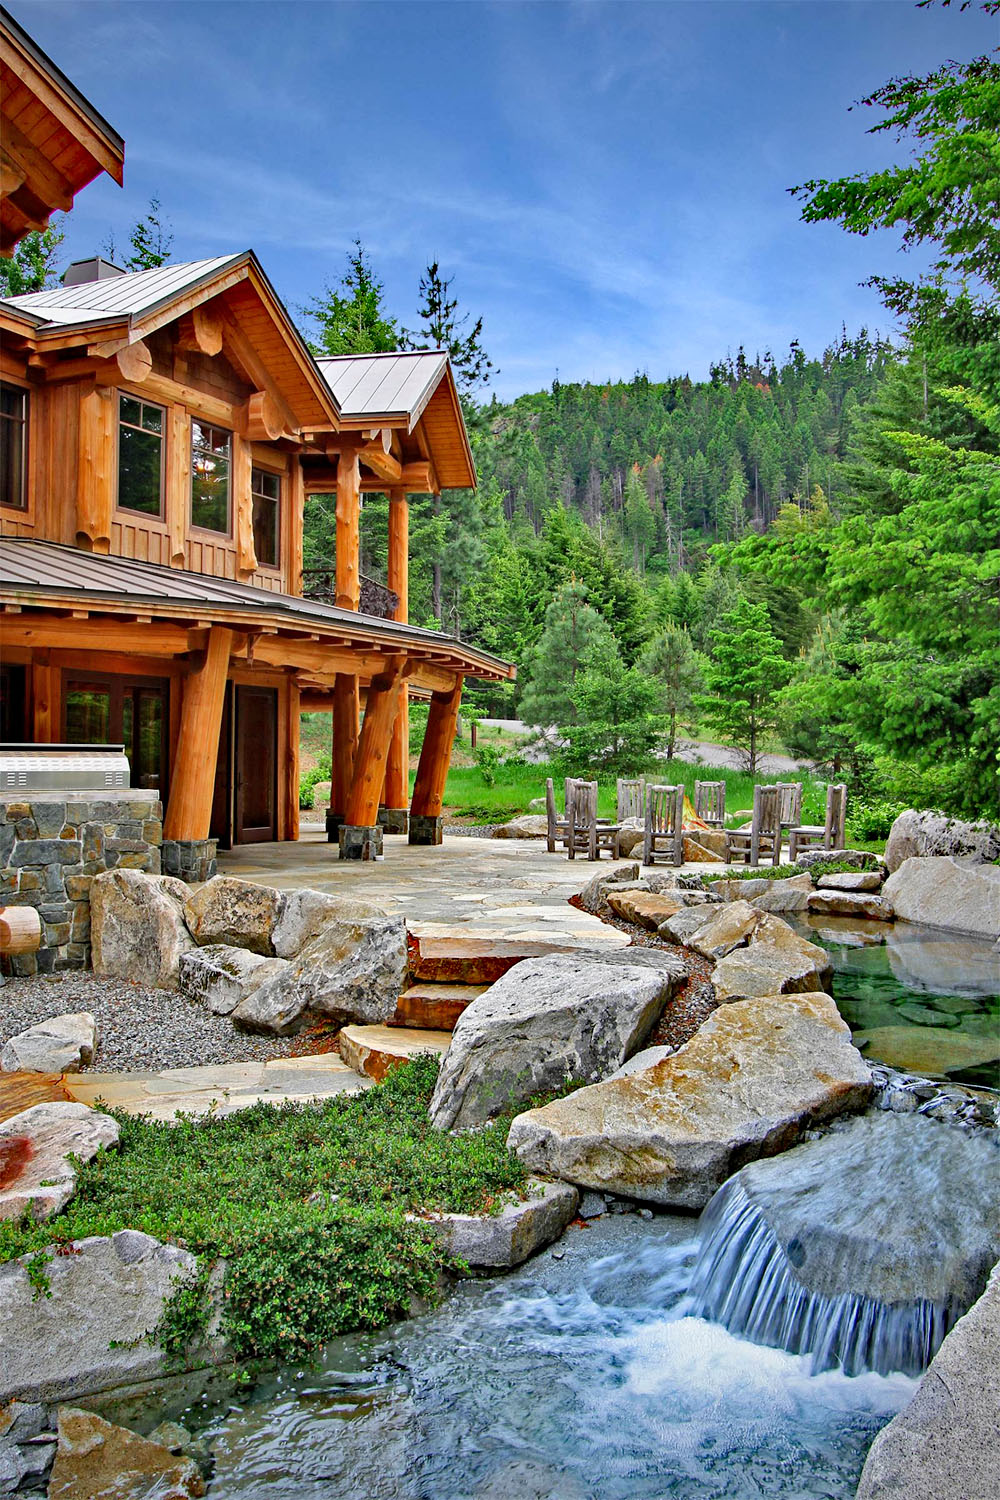 Luxury Rustic Log Home with Waterfall and Mountain Backdrop